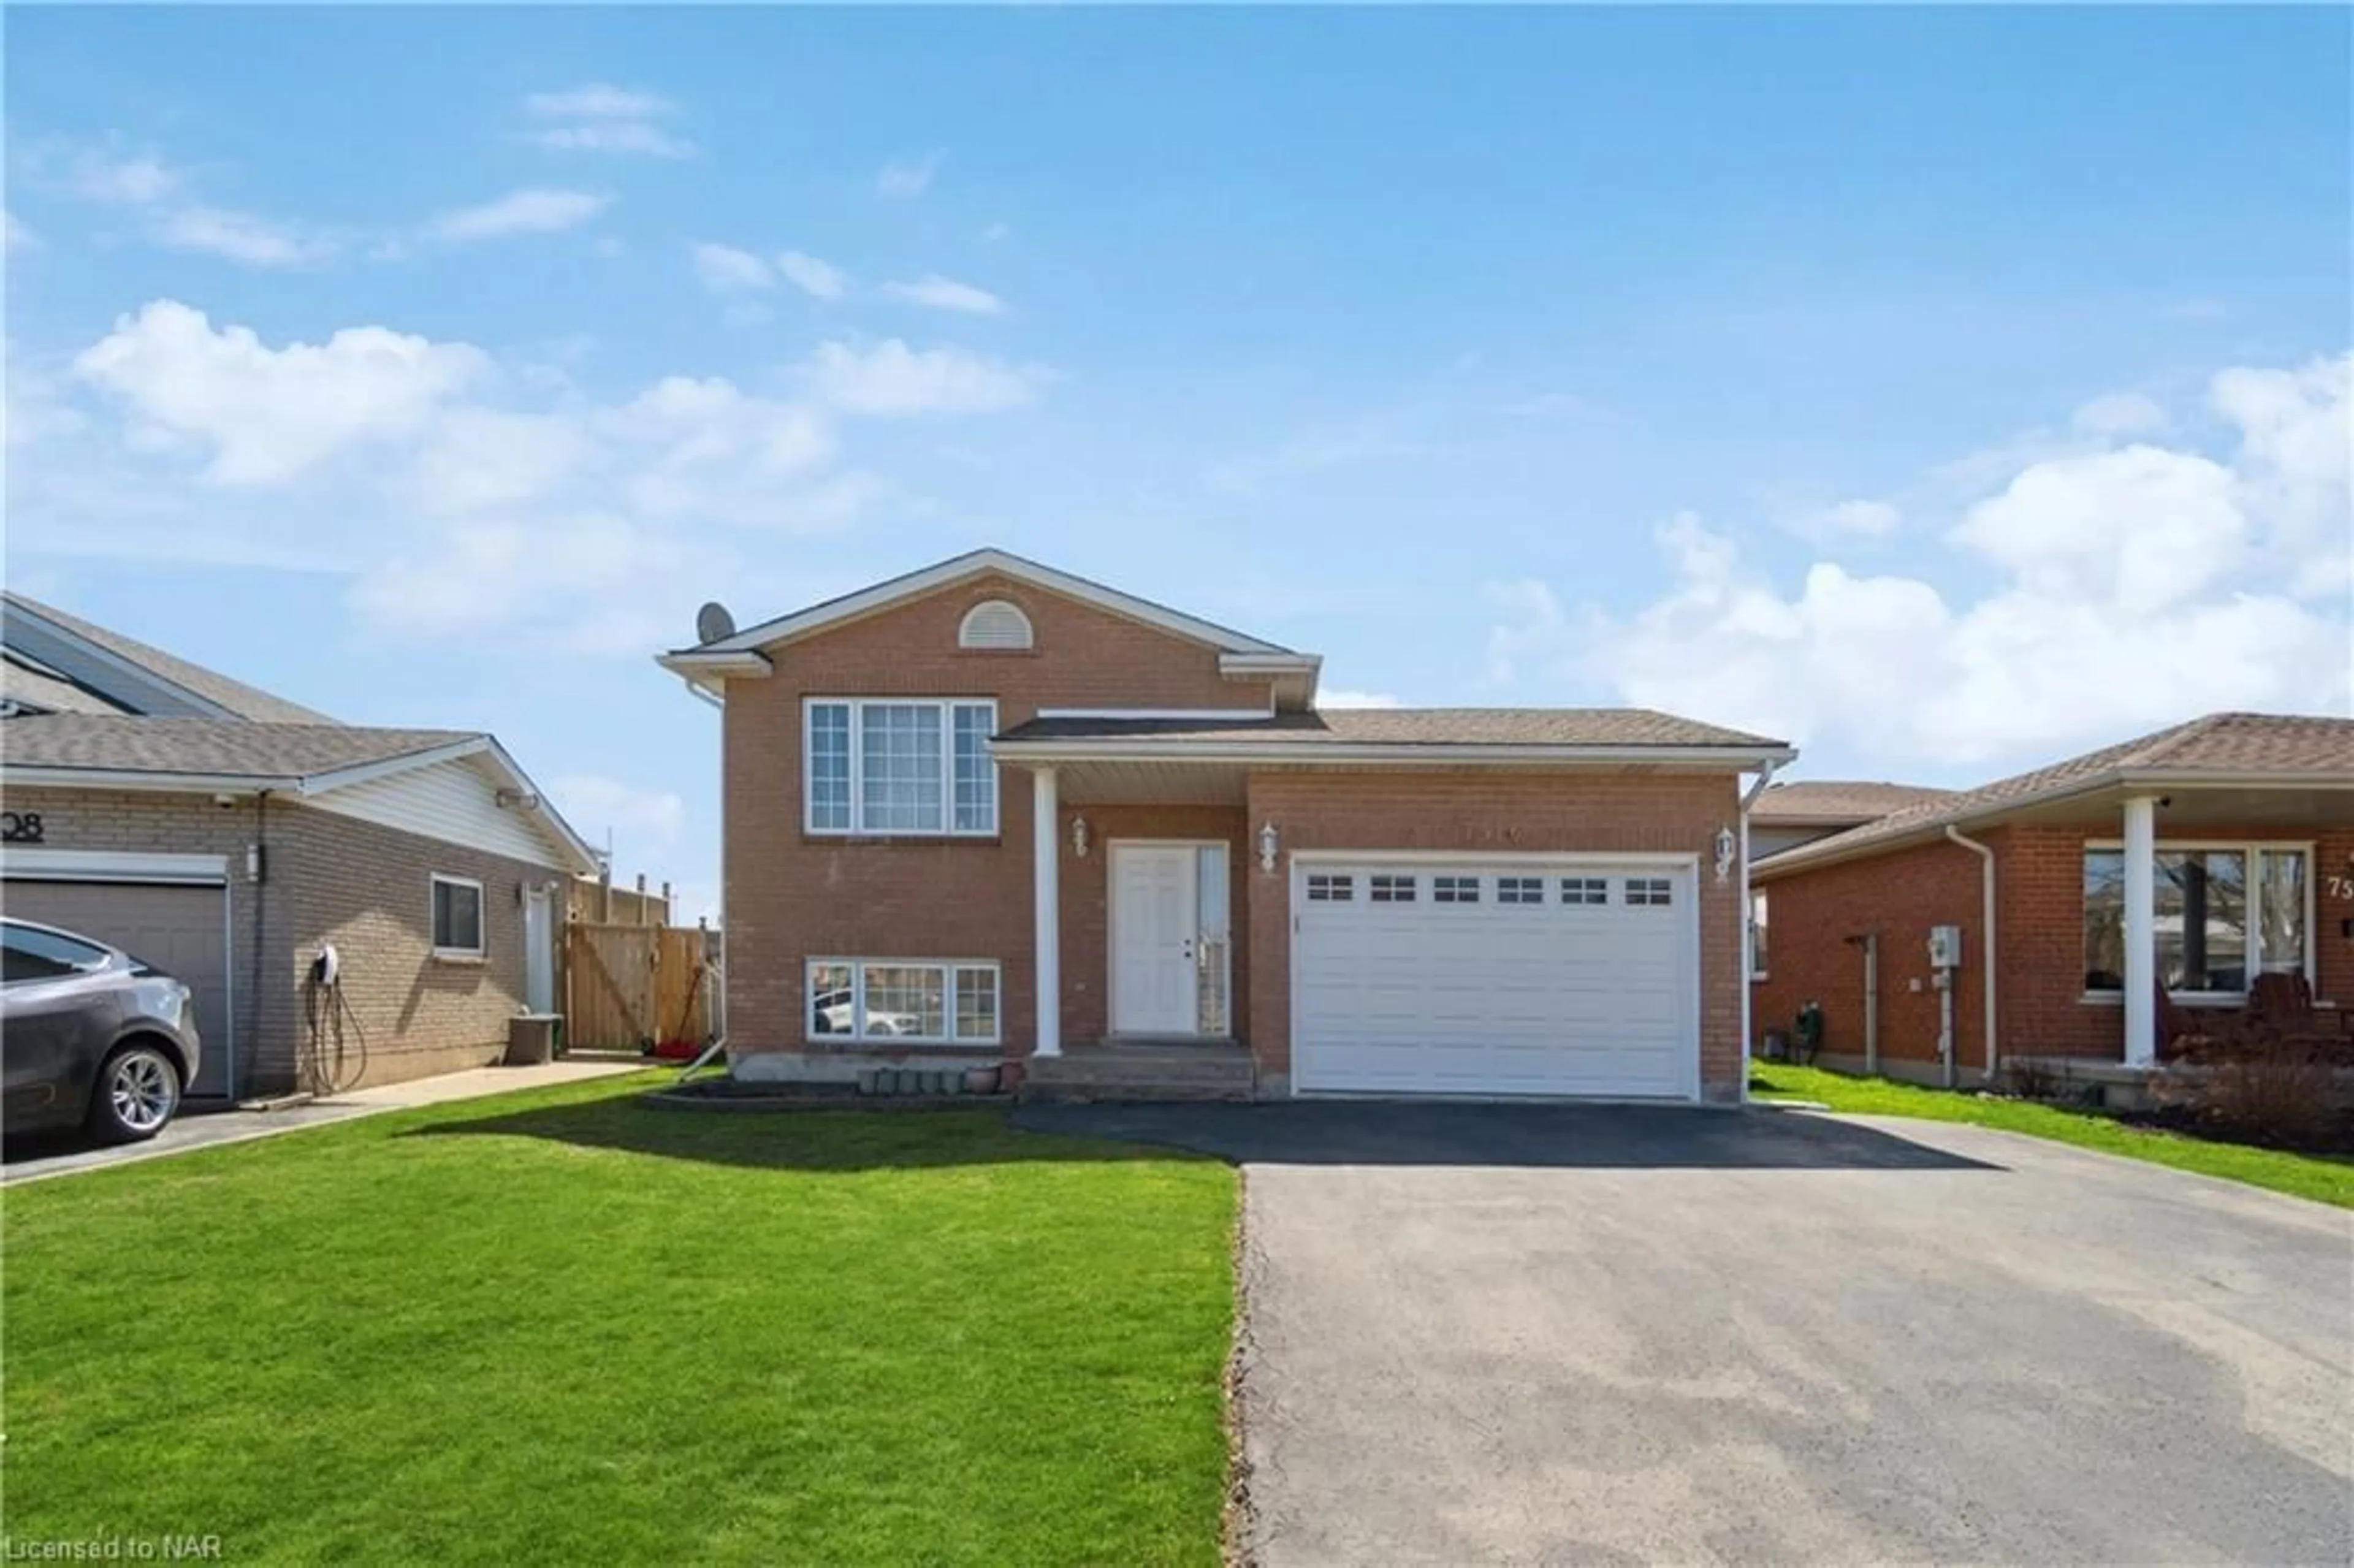 Frontside or backside of a home for 7516 Monastery Dr, Niagara Falls Ontario L2H 3A7